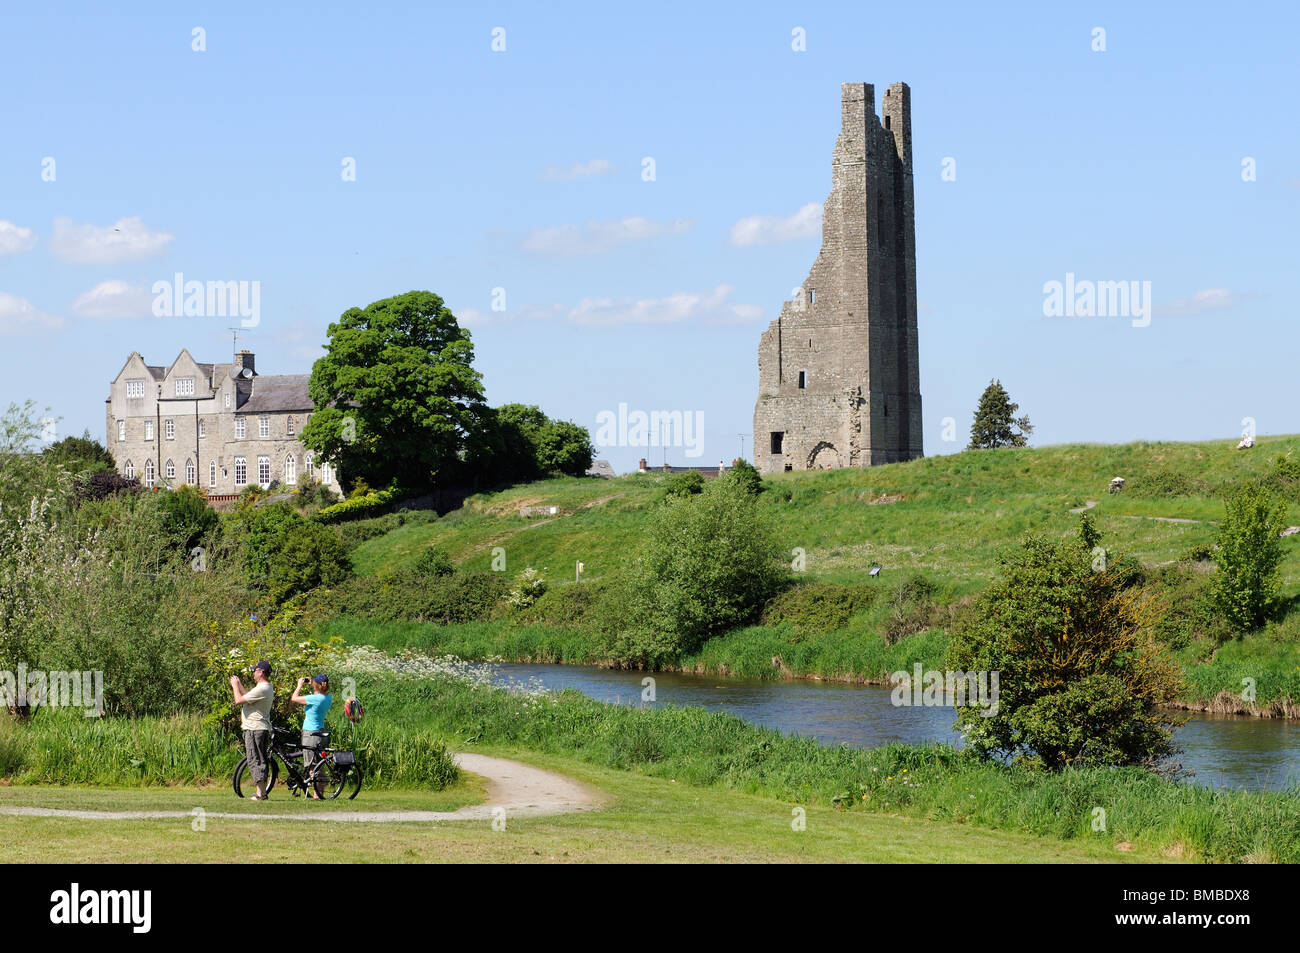 St Marys Abbey and The Yellow Steeple which overlooks the Irish town of Trim, County Meath Ireland & the River Boyne Stock Photo